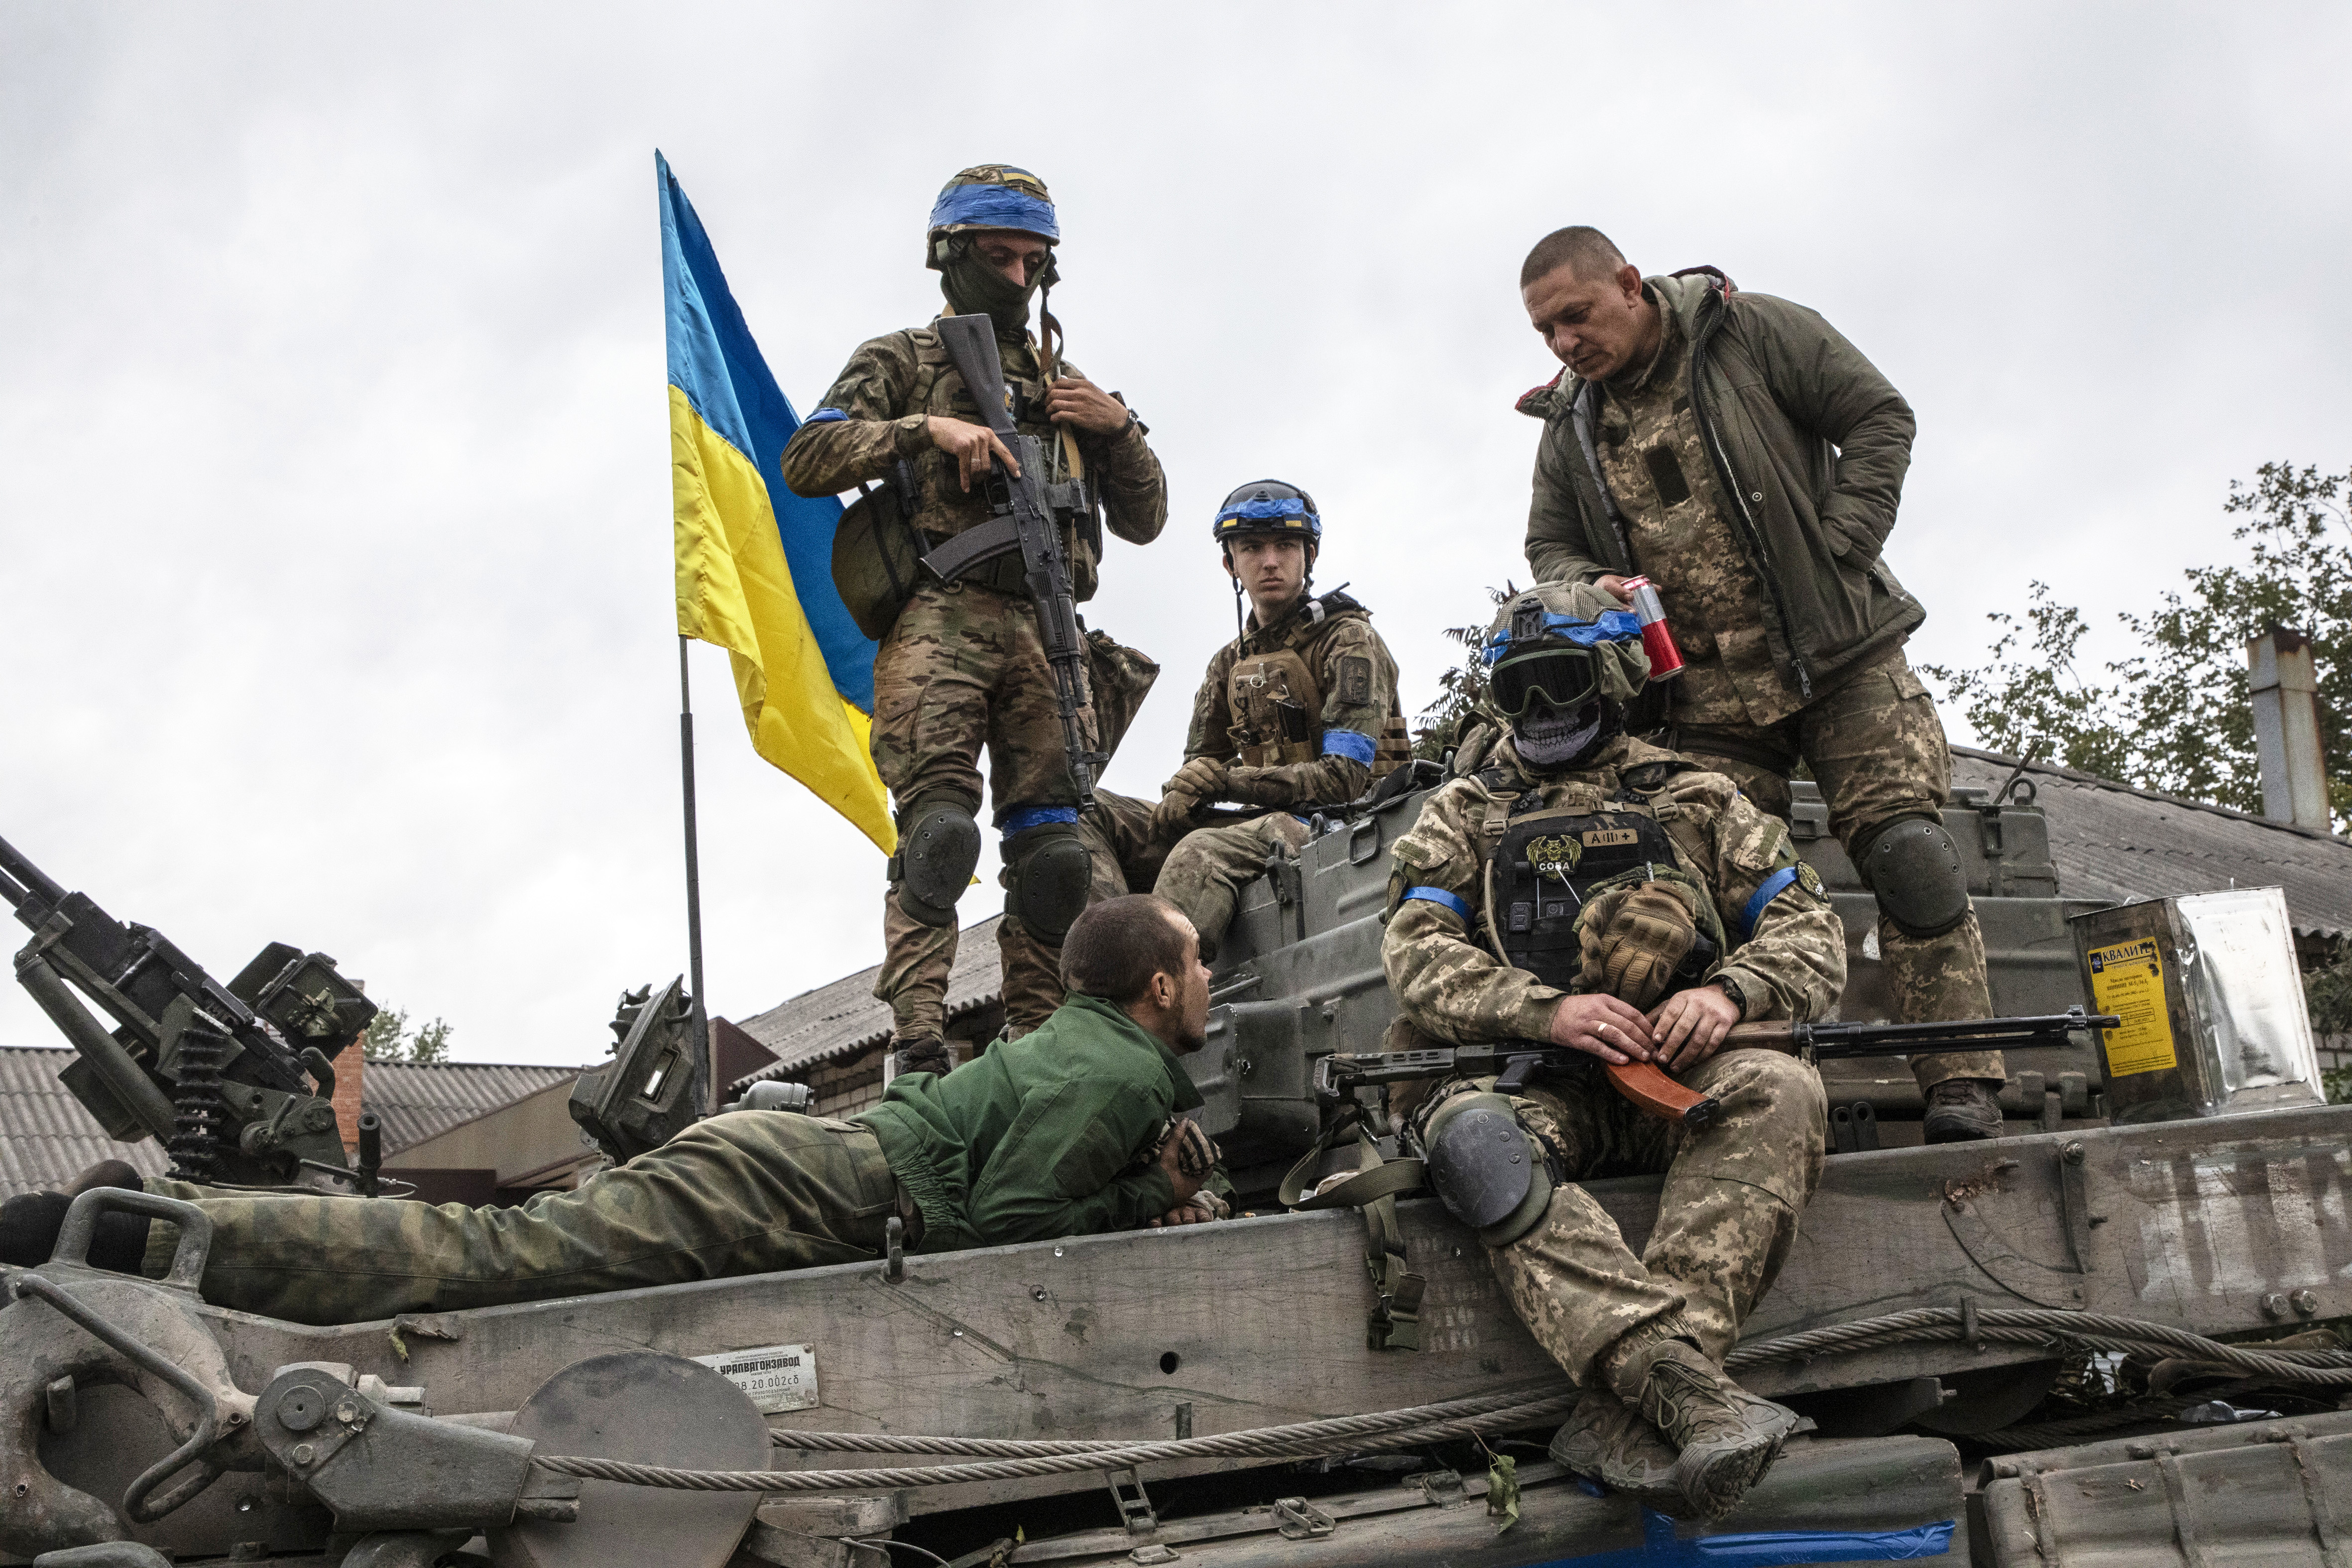 Several soldiers on top of a tank that flies a Ukrainian flag.